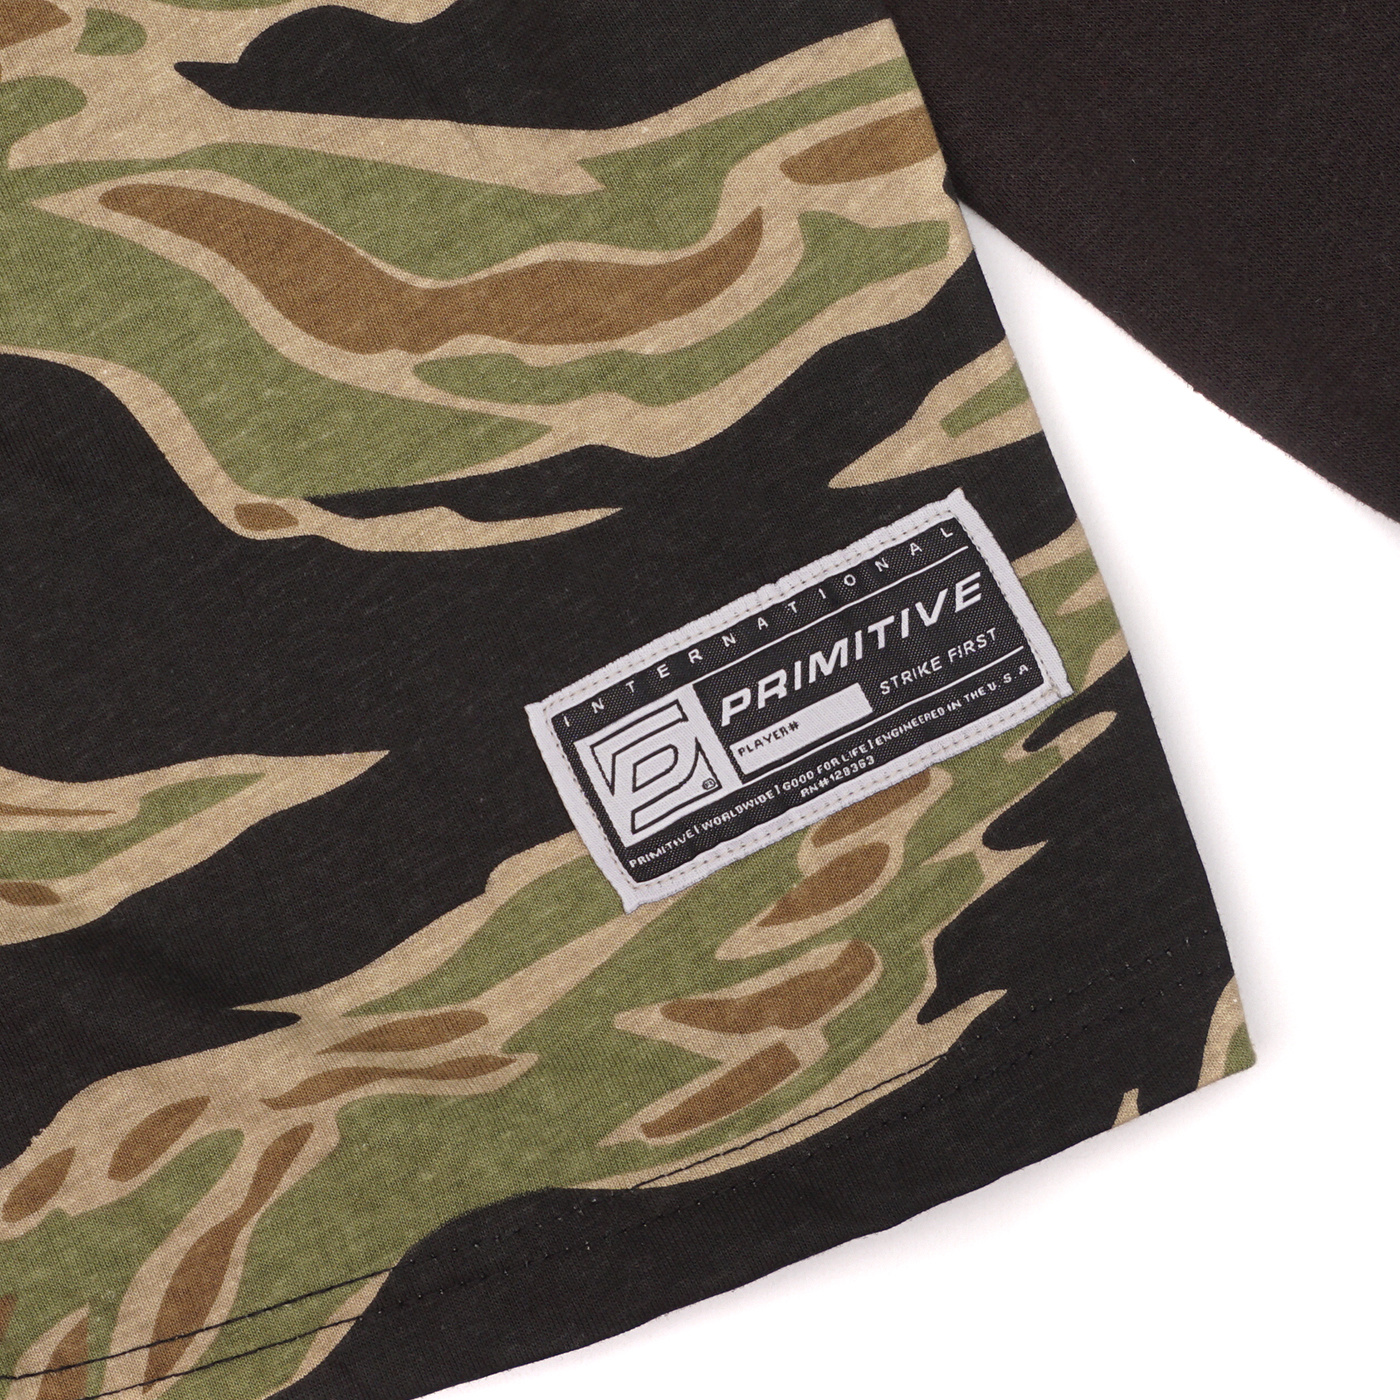 Primitive Tiger Two-Fer Hooded Camo Baseball Jersey - Size XL - Green - Jerseys - Men's Clothing at Zumiez